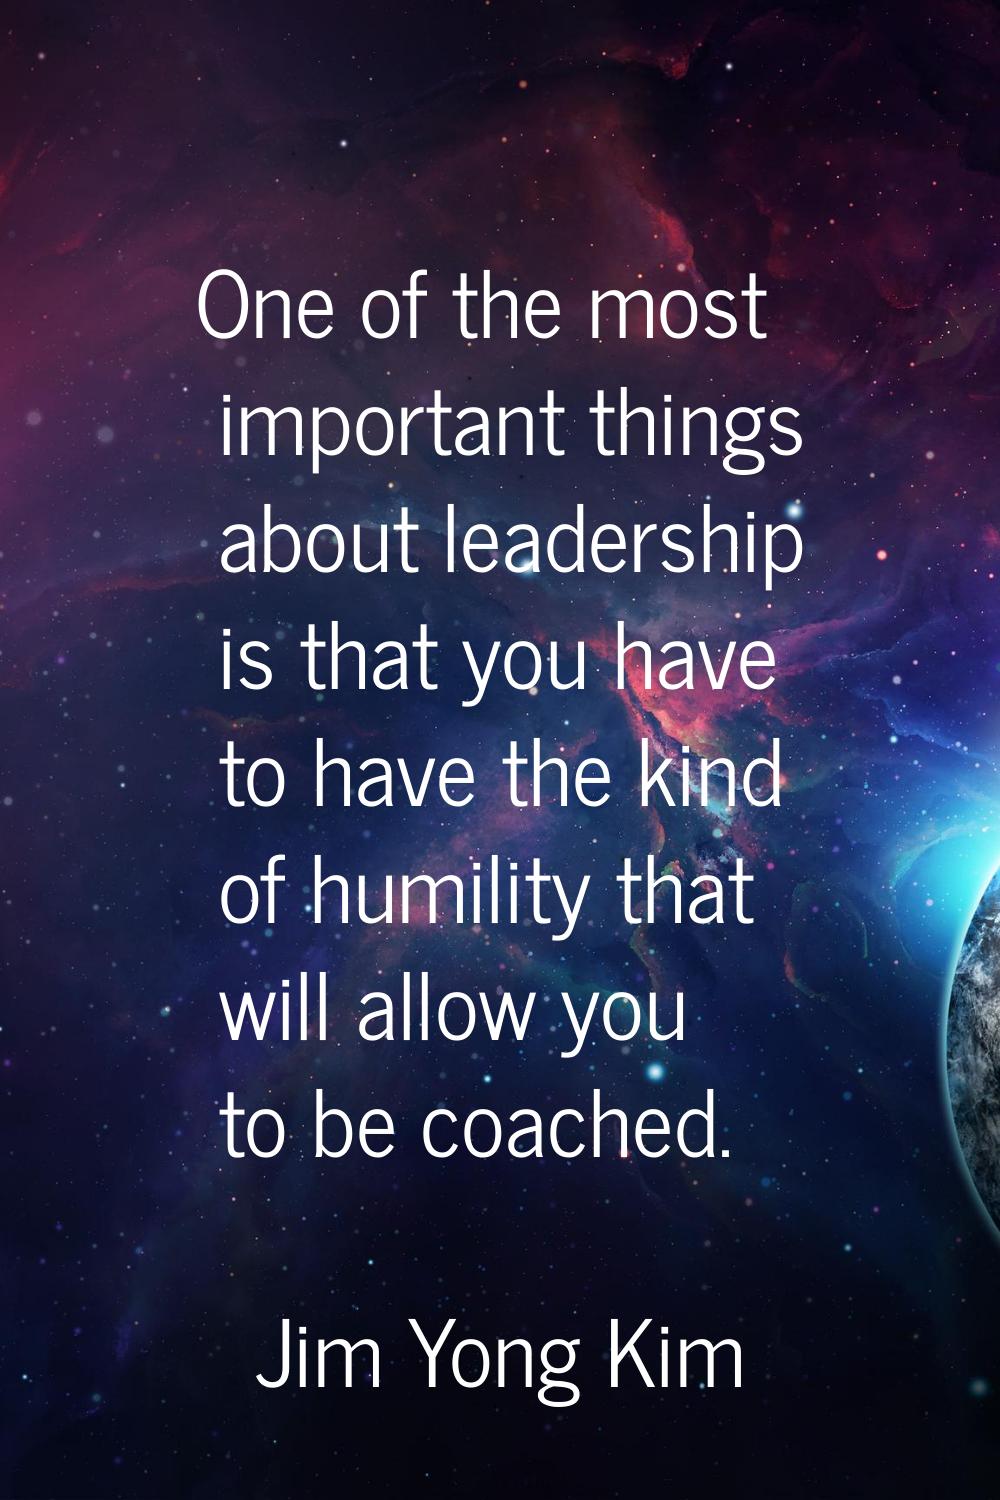 One of the most important things about leadership is that you have to have the kind of humility tha